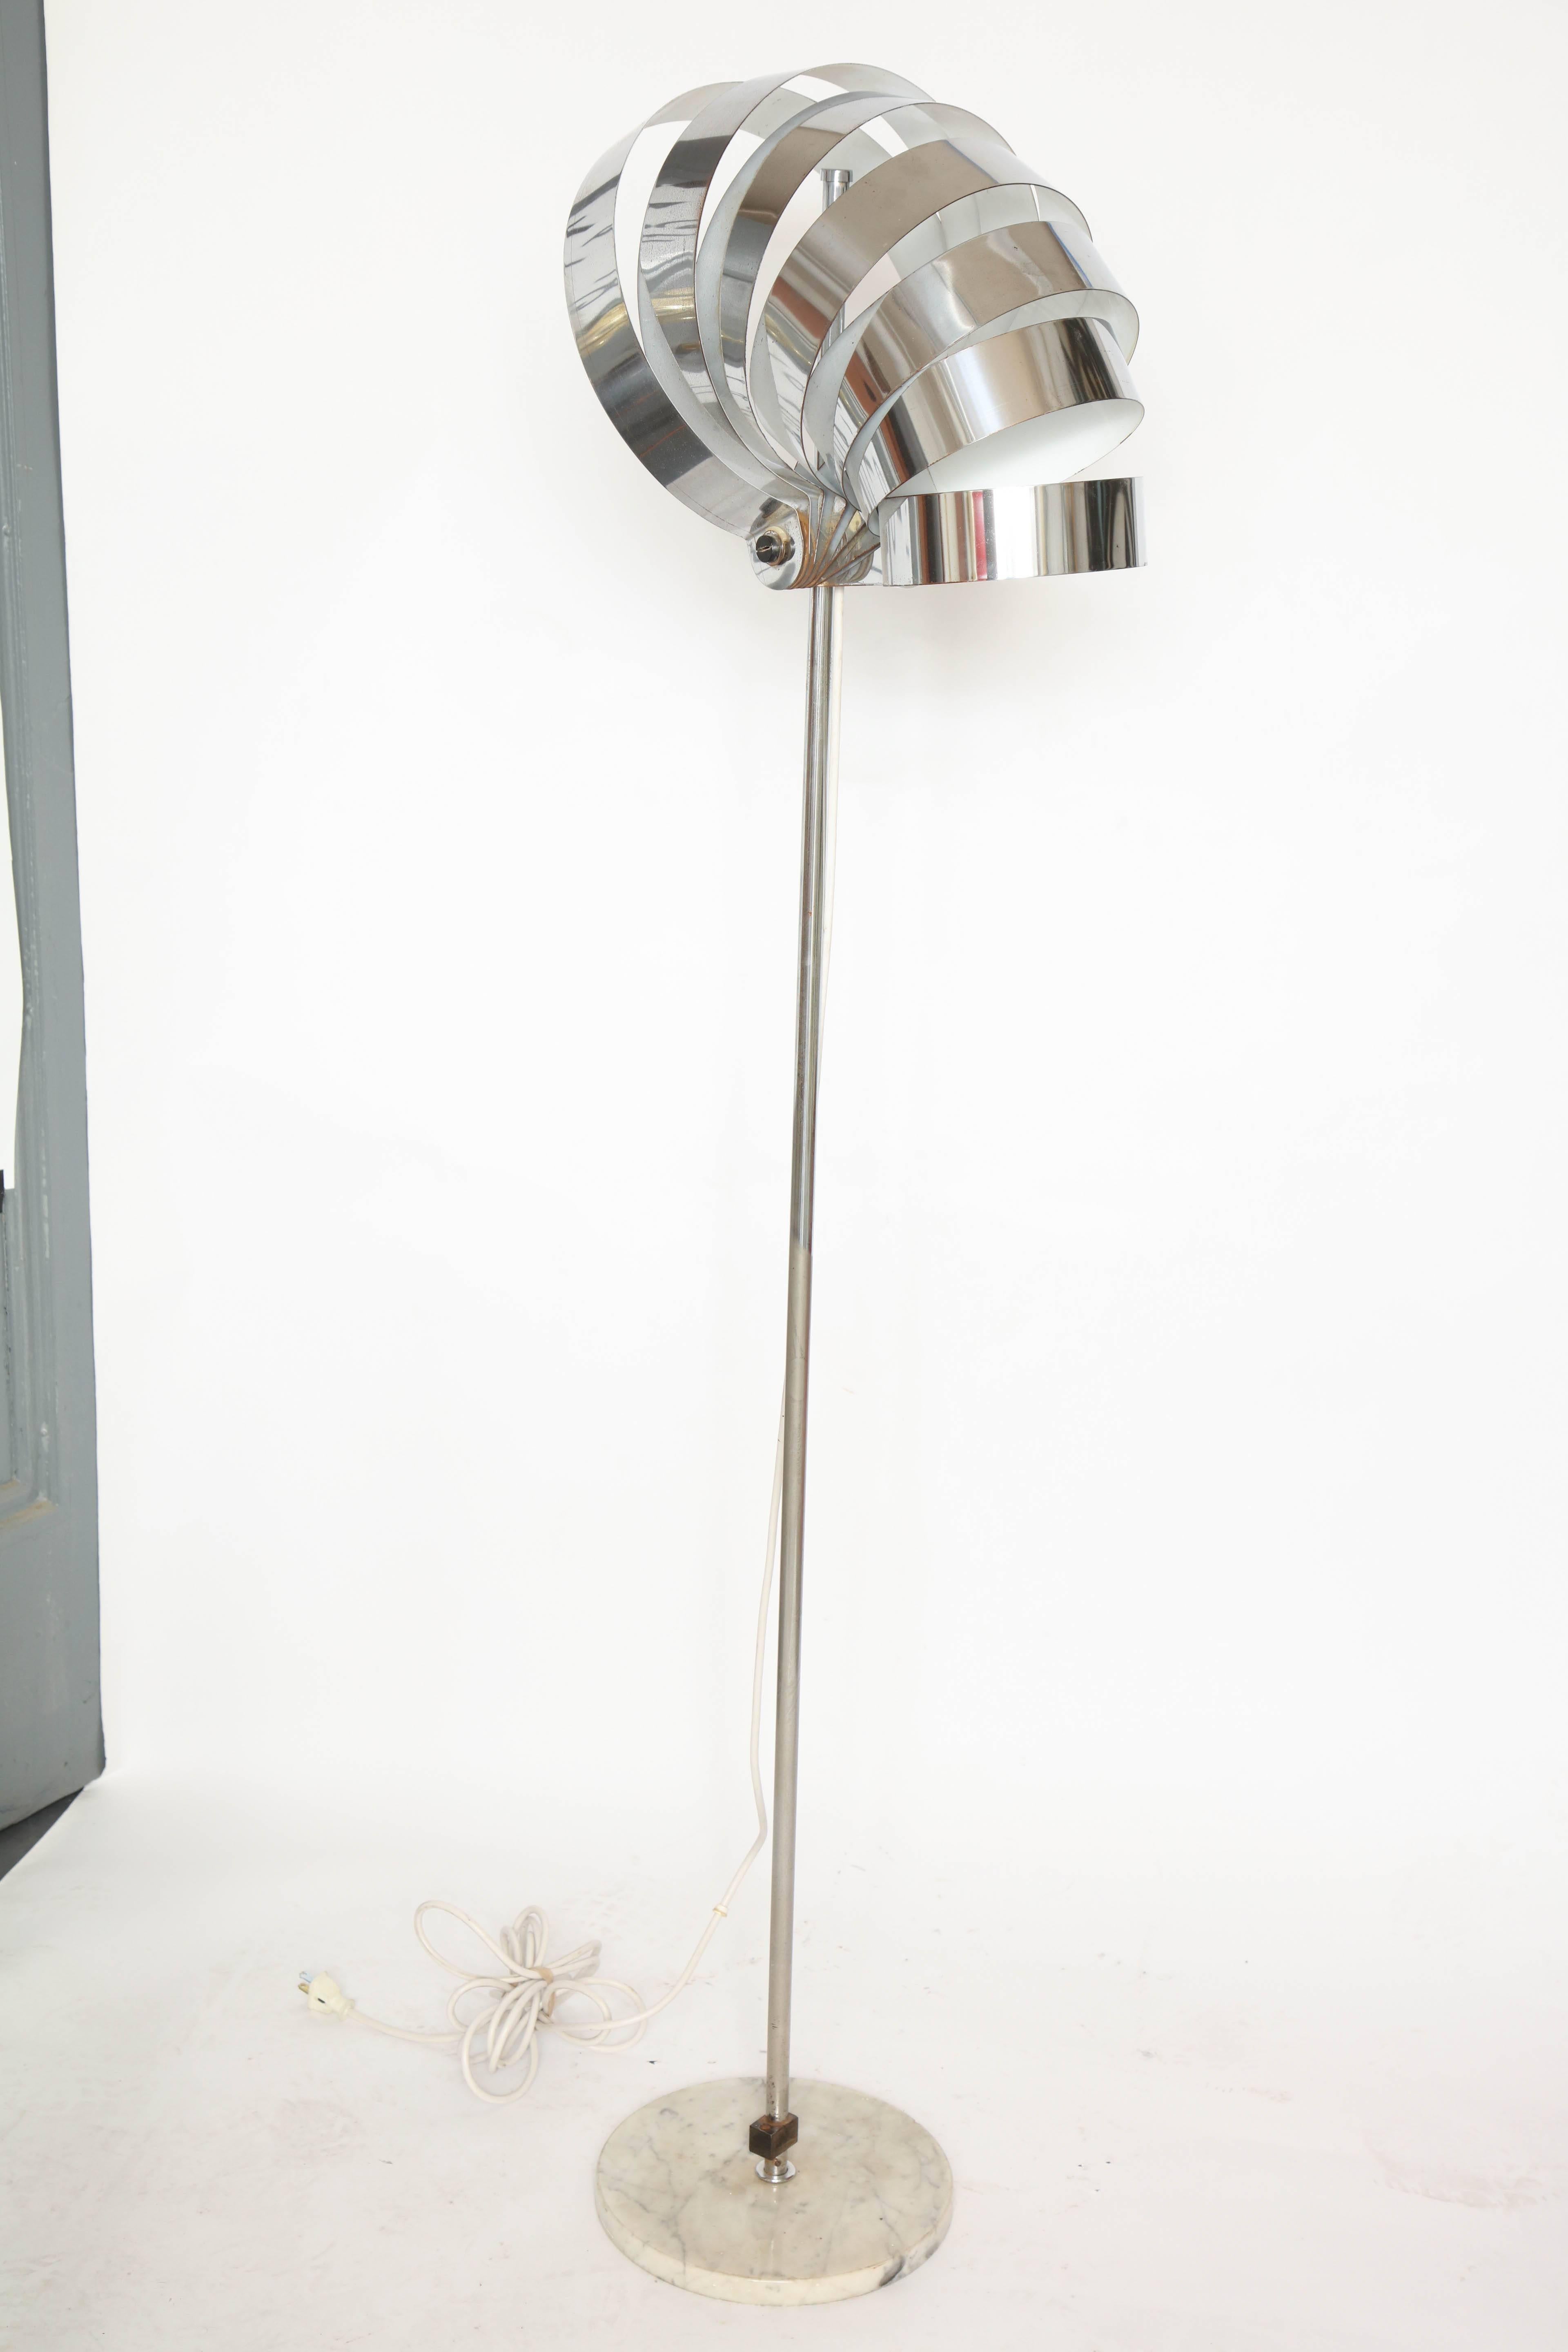 Floor Lamp Articulated  Mid-Century Modern Italy  1960s chrome and marble. New Sockets and Rewired